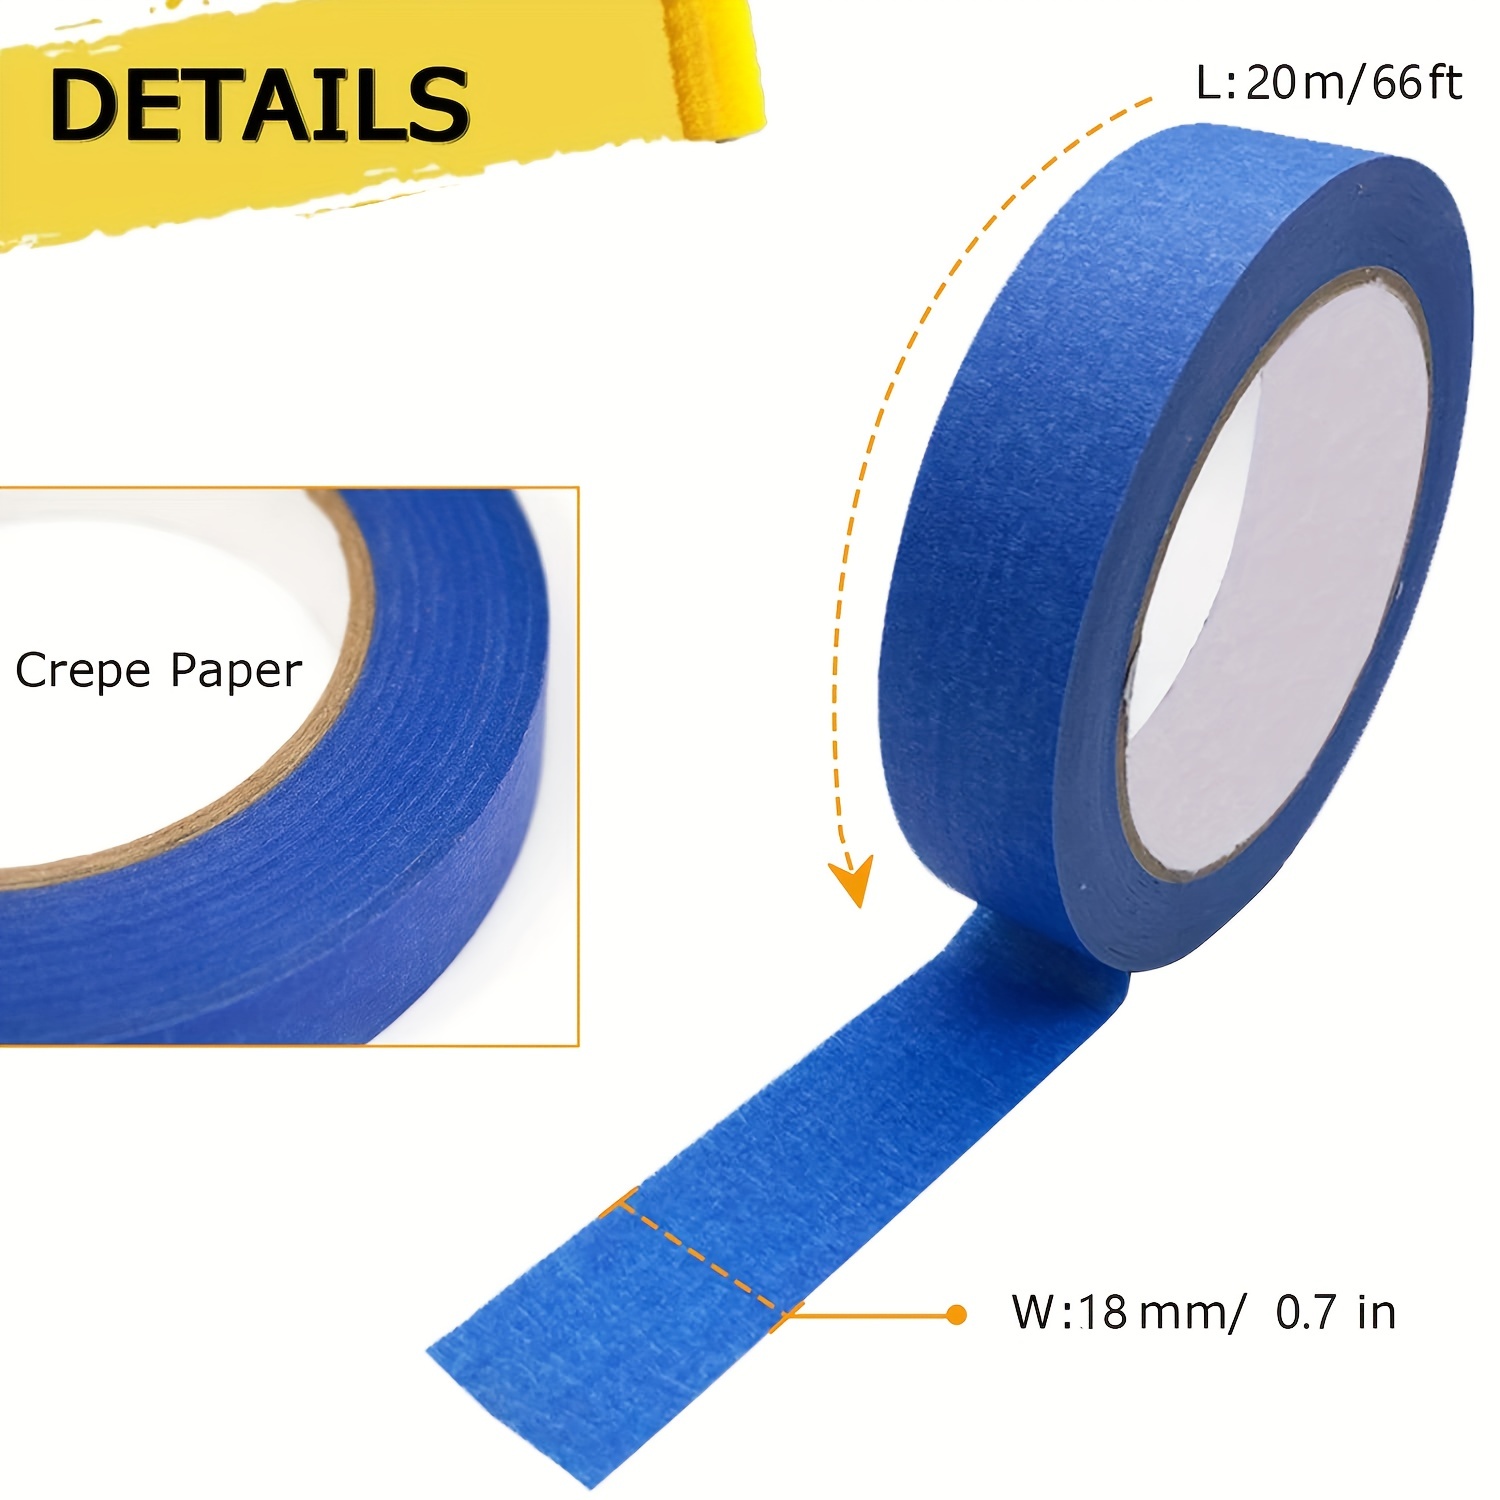 Extra Wide Masking Tape, 4 x 164ft - 24 Rolls Carton Pack